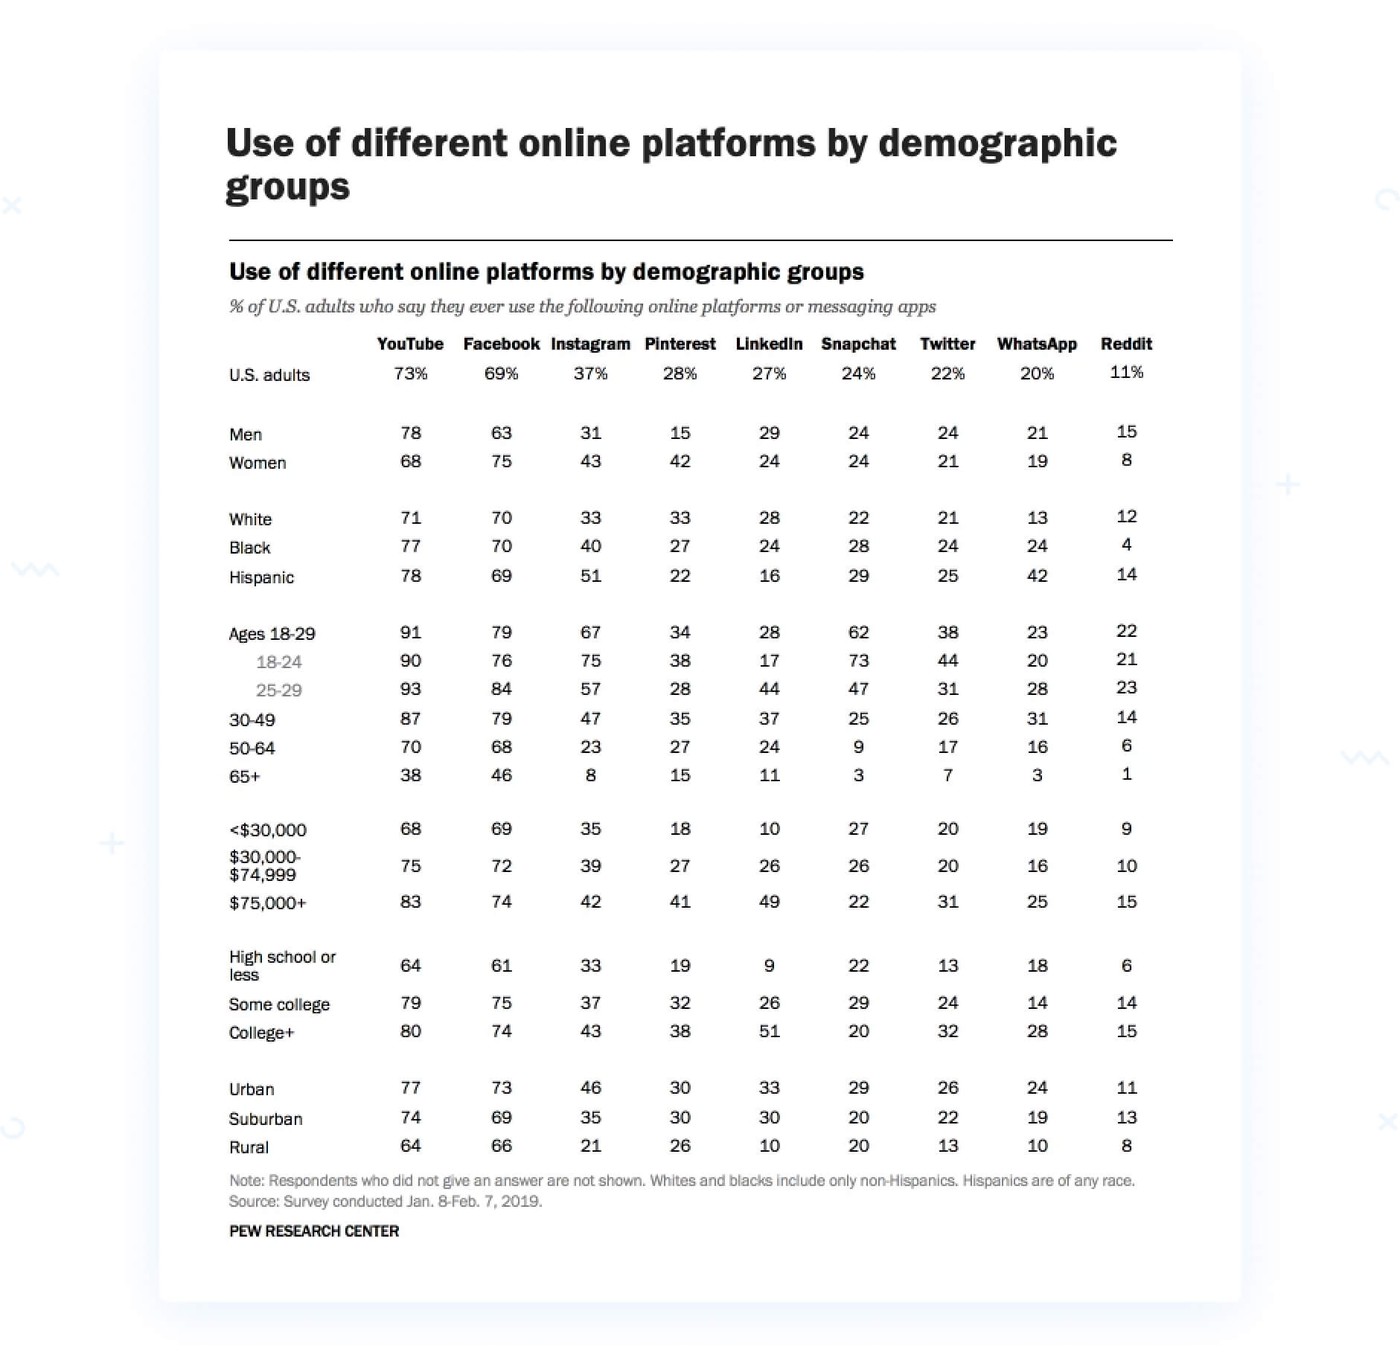 Use of different online platforms by demographic groups